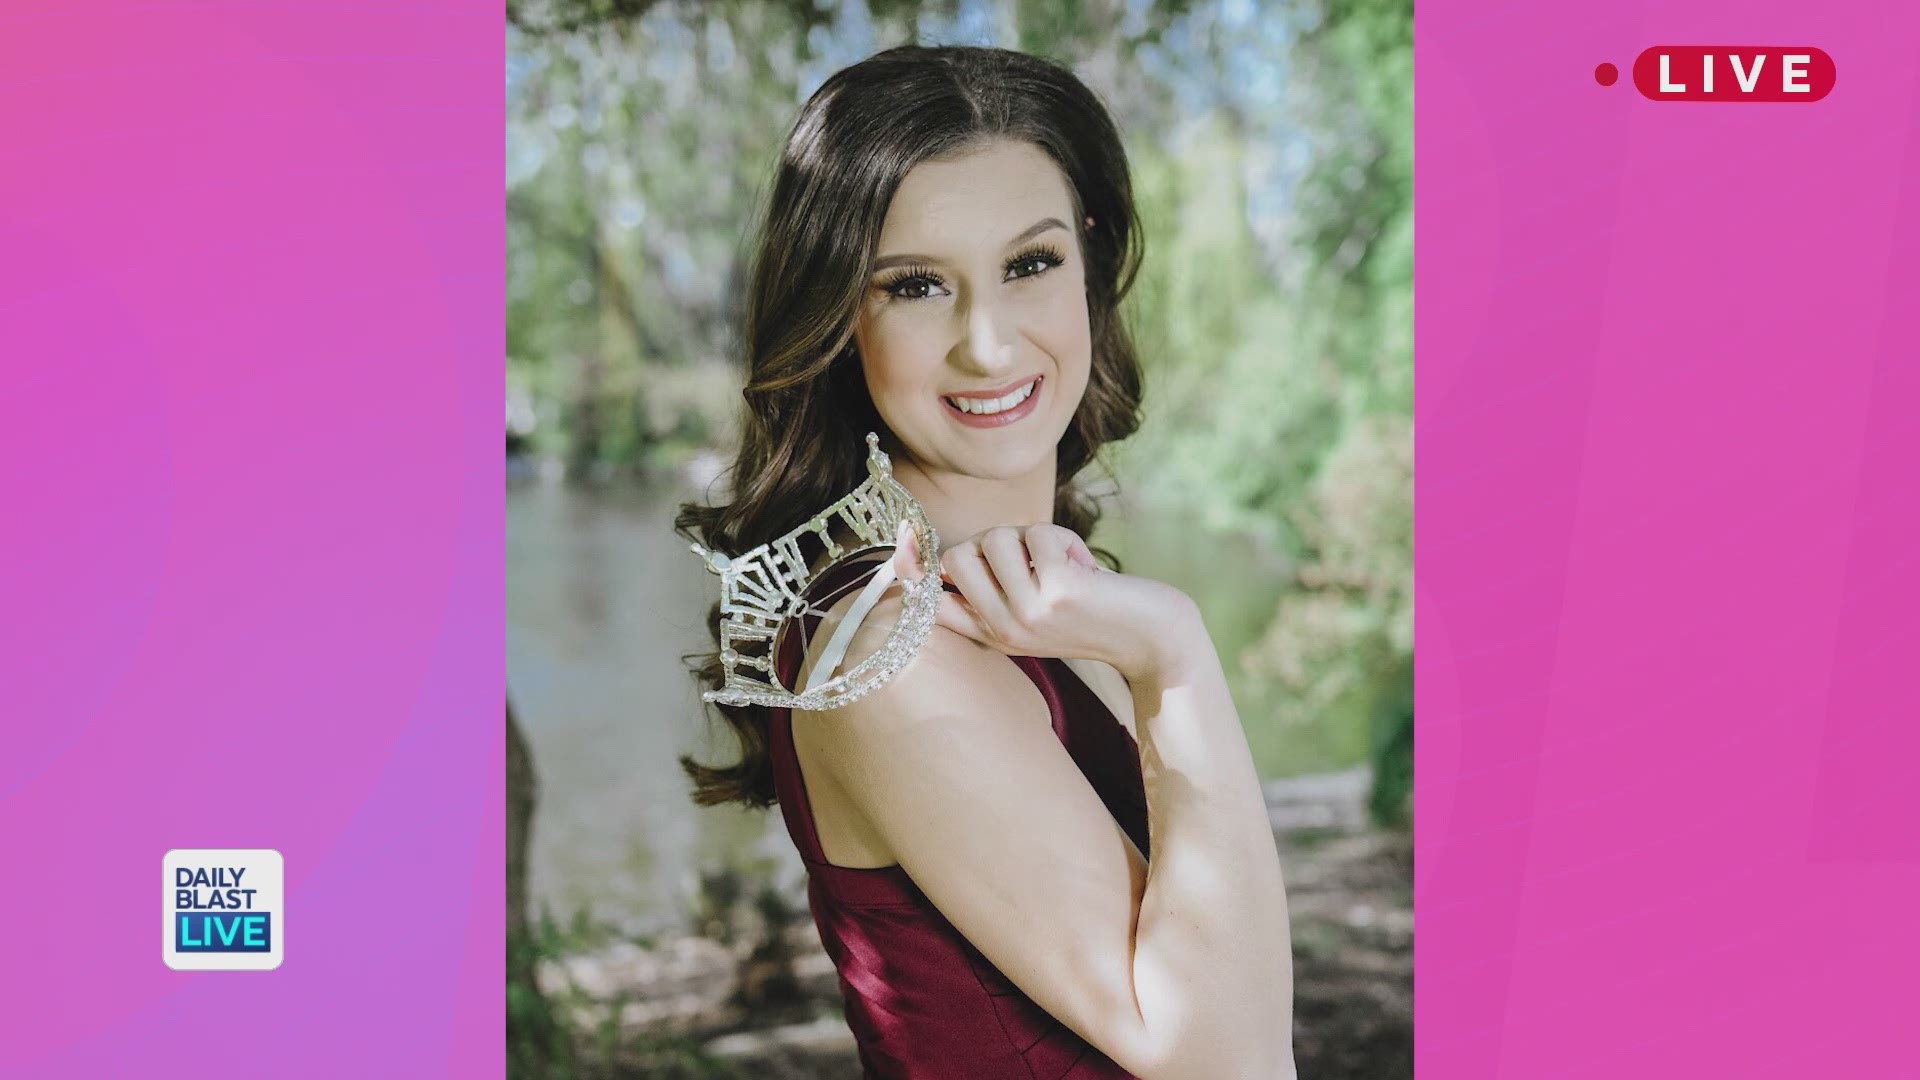 Pageant girl, Samantha Schubert, is empowering girls with disabilities through her 'Miss Exceptional' pageant. Inspired by her brother who has autism, Schubert wanted to create a pageant that was approachable for differently abled bodies. 'Miss Exceptiona